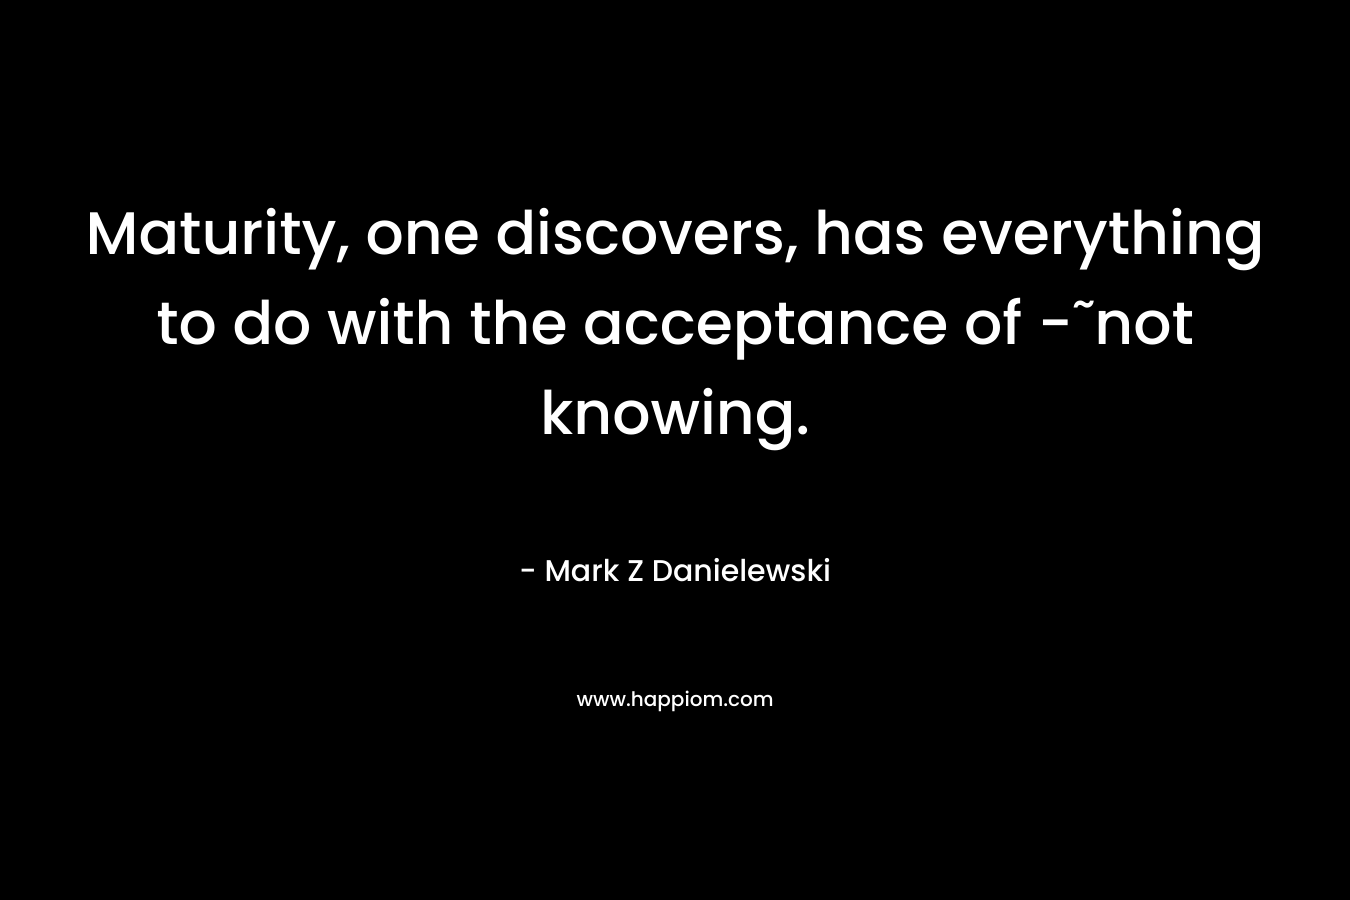 Maturity, one discovers, has everything to do with the acceptance of -˜not knowing. – Mark Z Danielewski